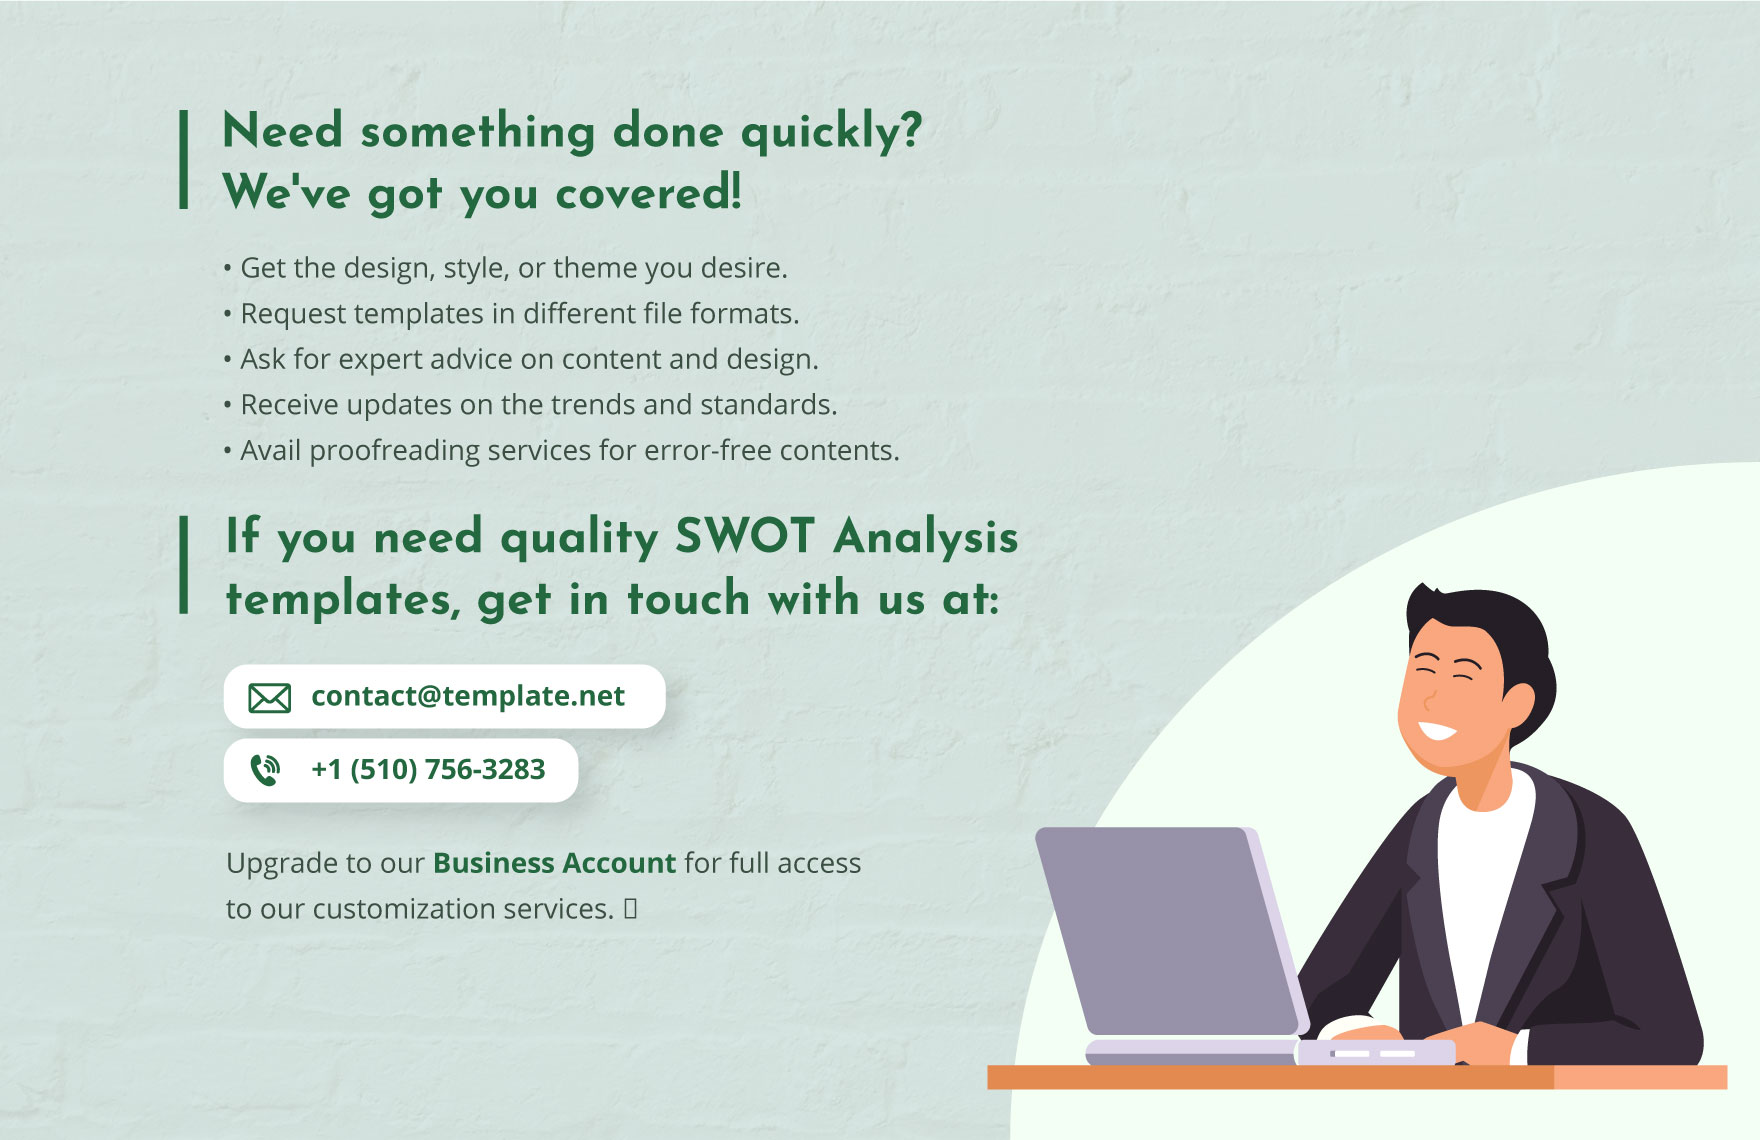 IT Cybersecurity Consulting SWOT Analysis Template